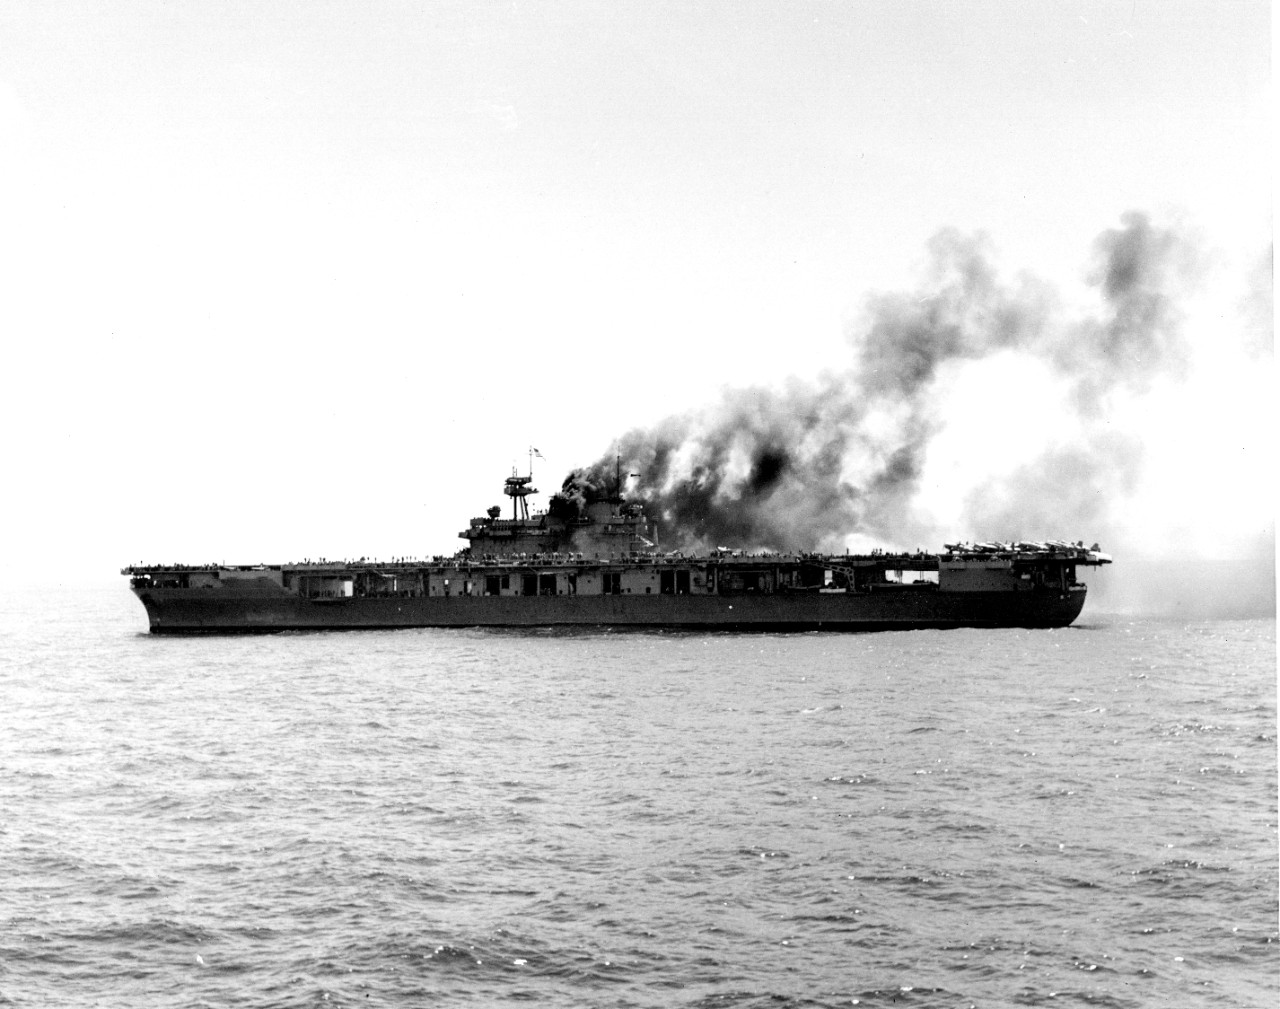 Photo #: 80-G-32301  Battle of Midway, June 1942